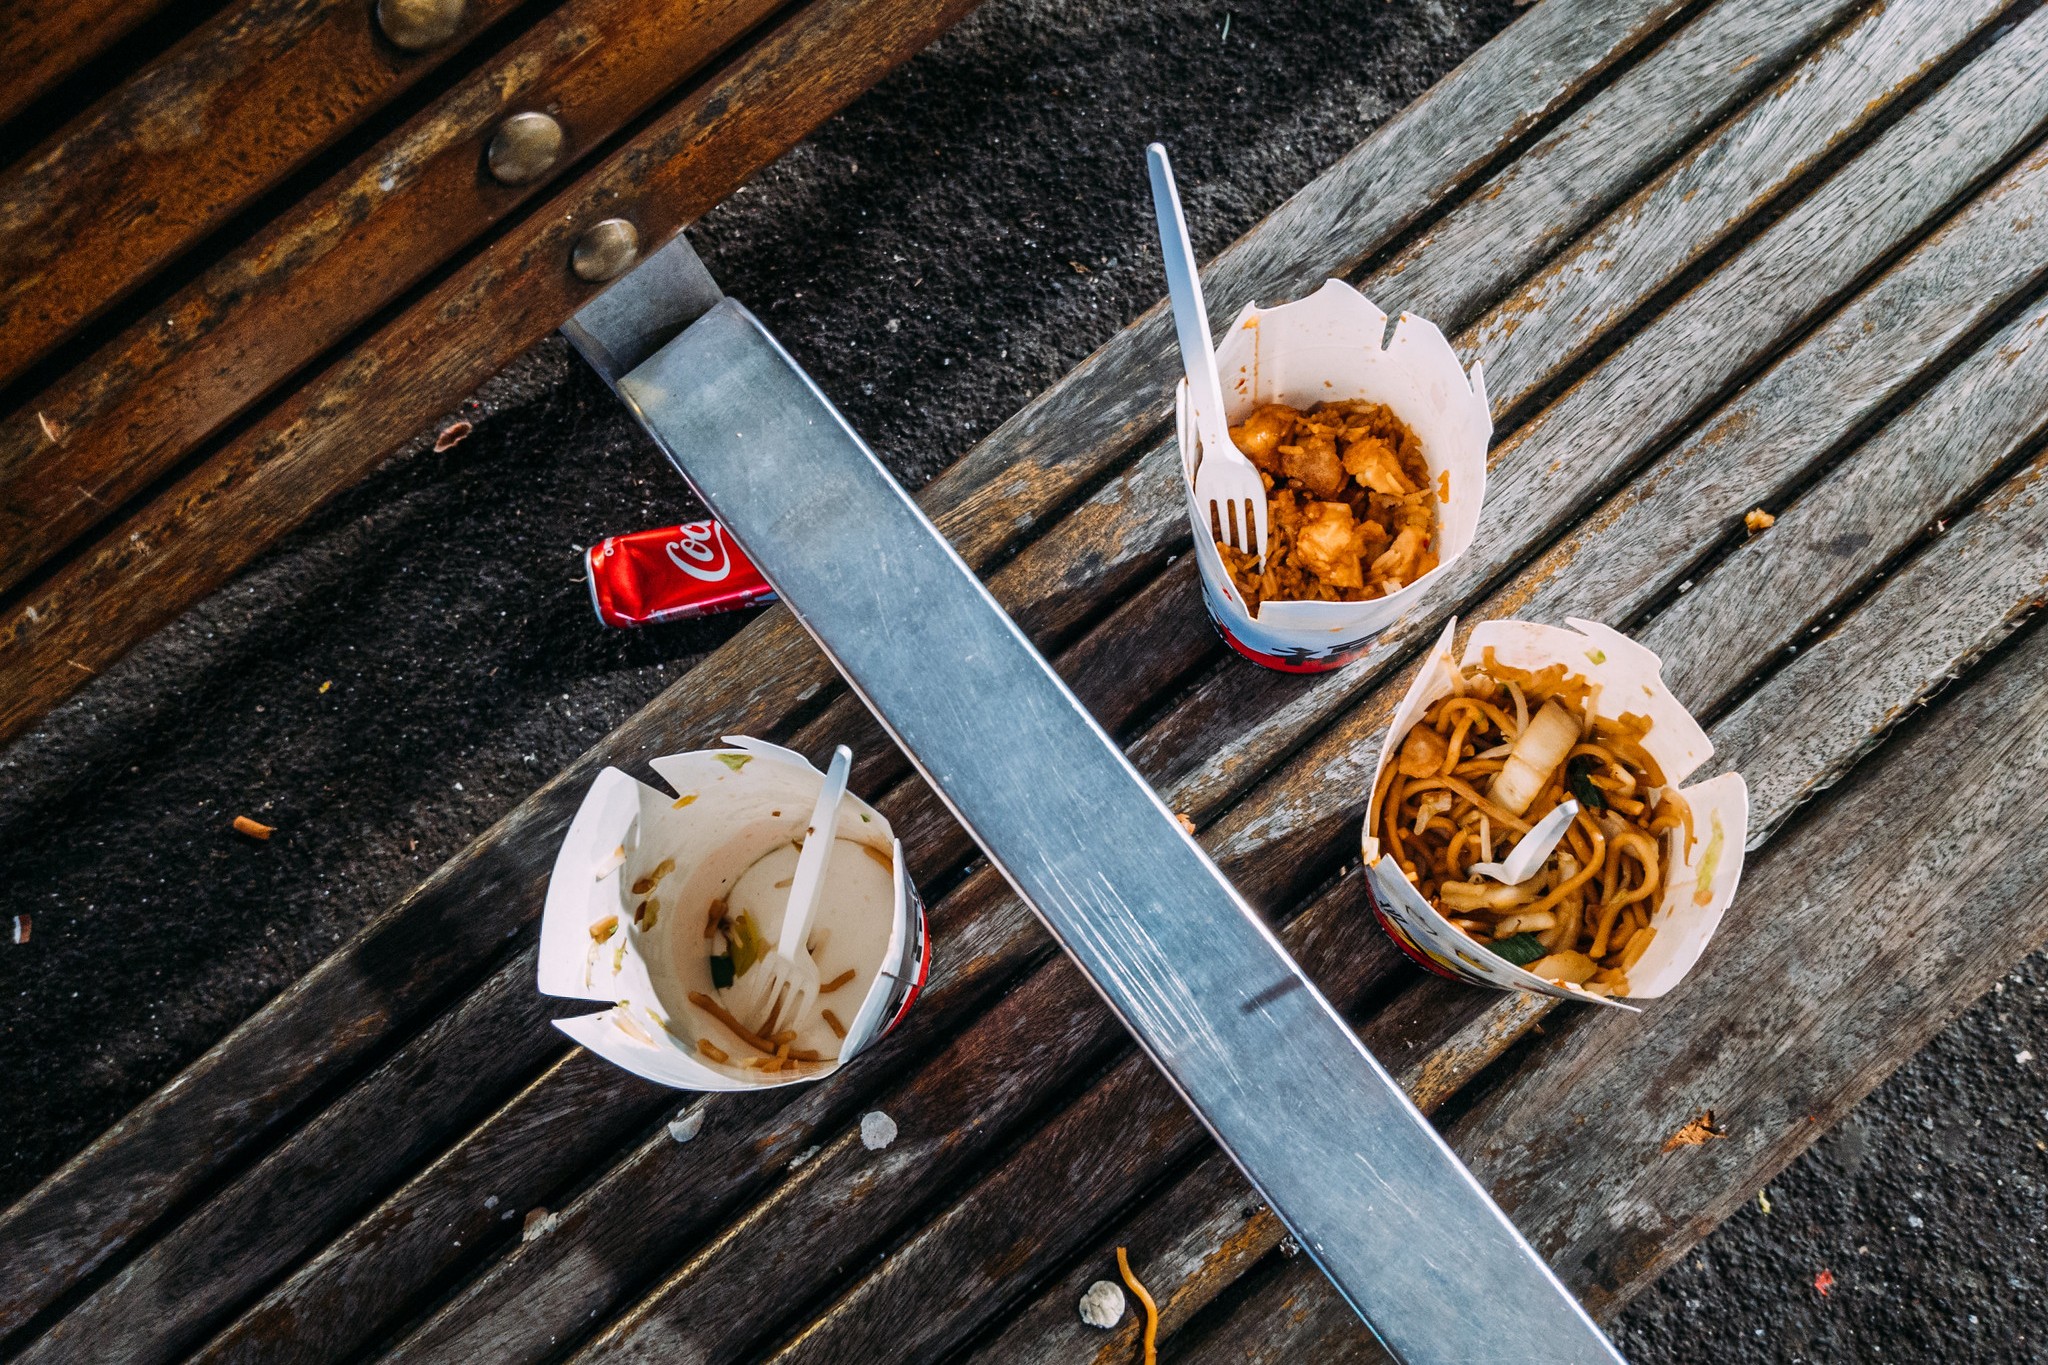 https://www.themanual.com/wp-content/uploads/sites/9/2022/03/chinese-food-leftovers-on-a-wooden-bench.jpg?fit=2048%2C1365&p=1